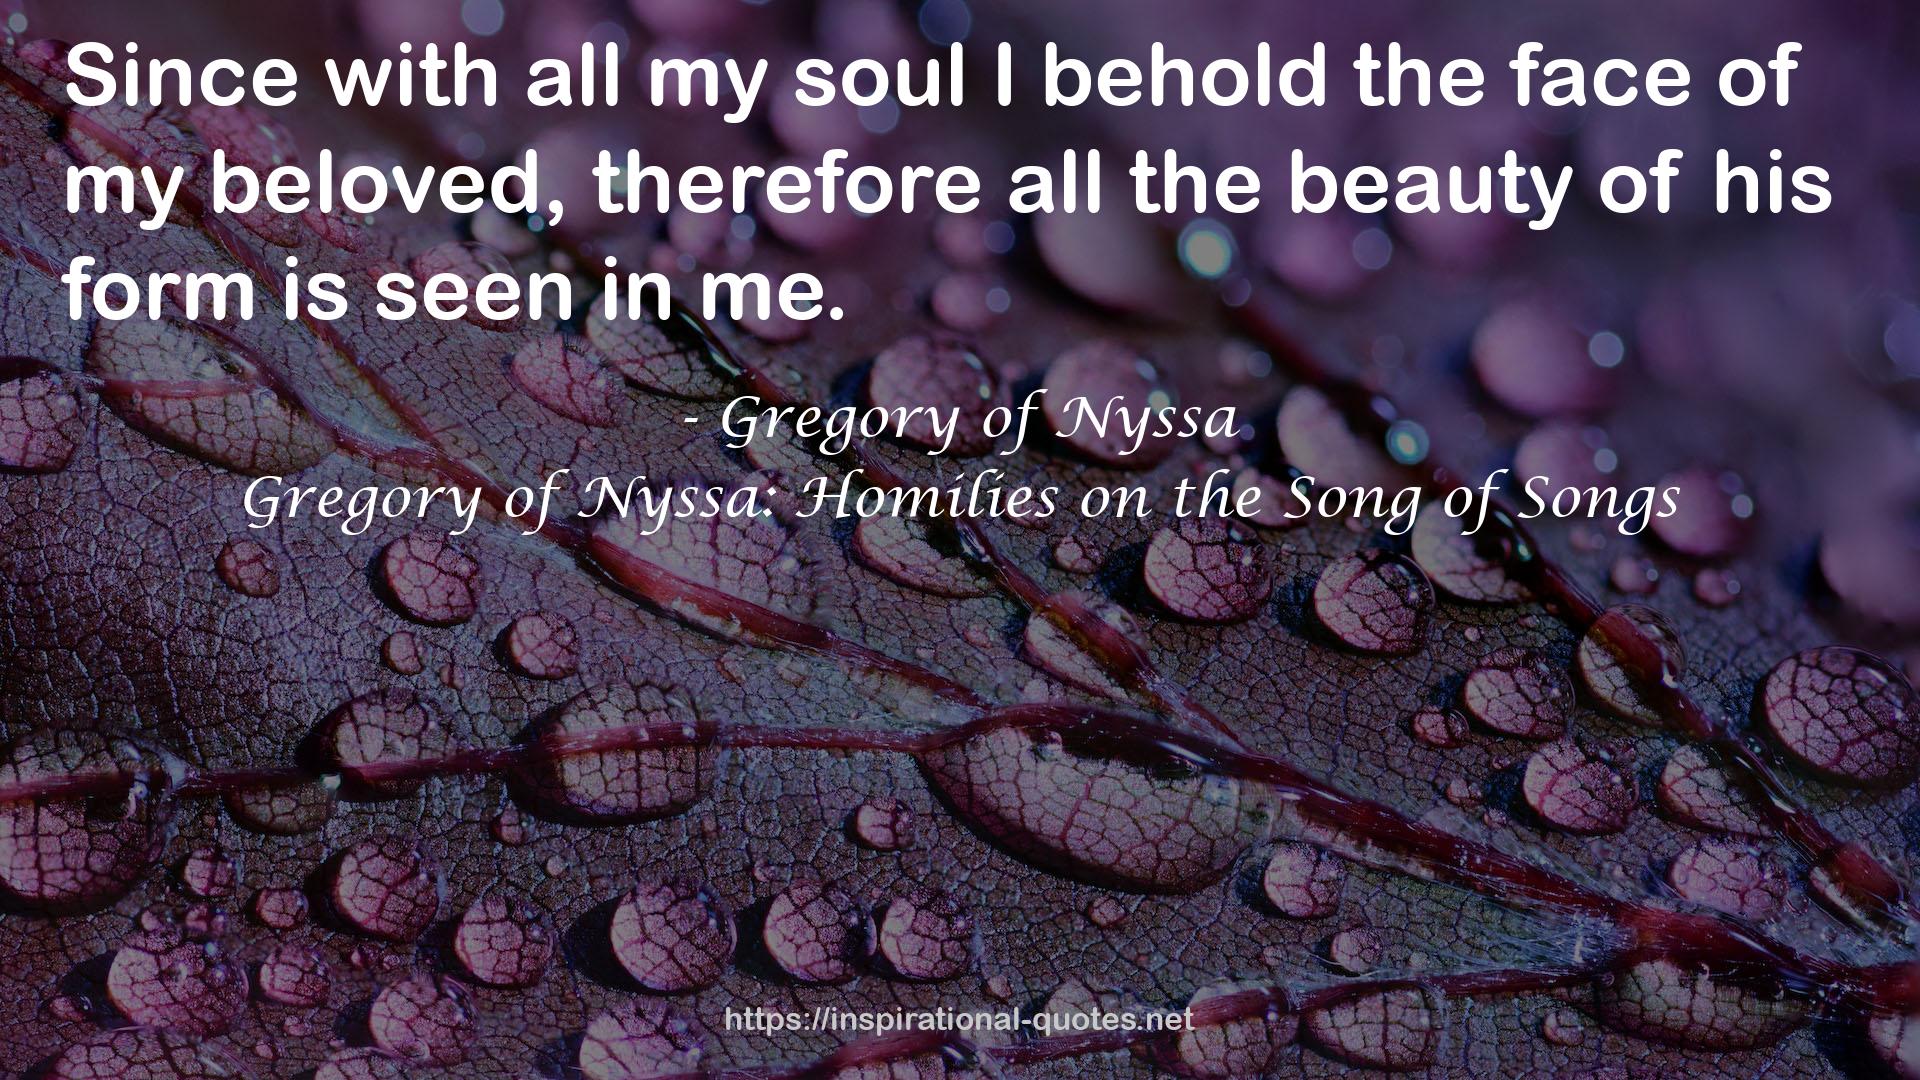 Gregory of Nyssa: Homilies on the Song of Songs QUOTES